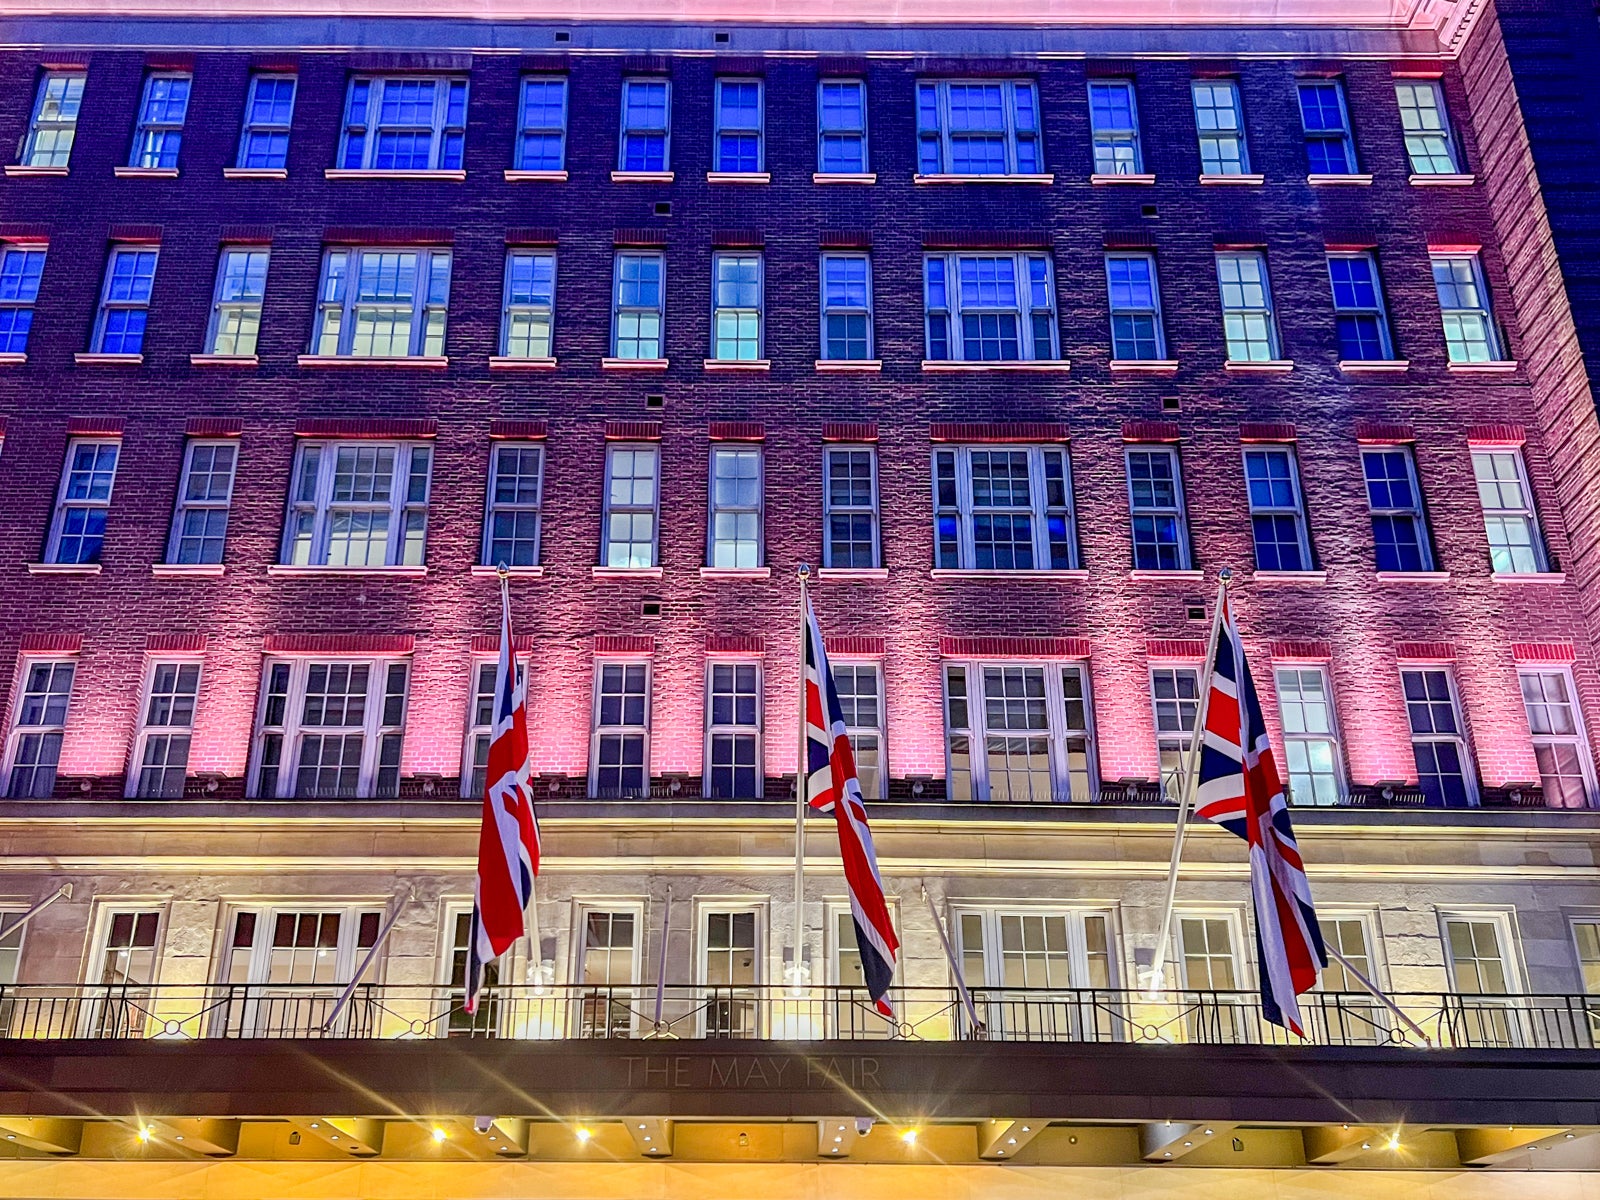 The May Fair Hotel Review, Mayfair, London